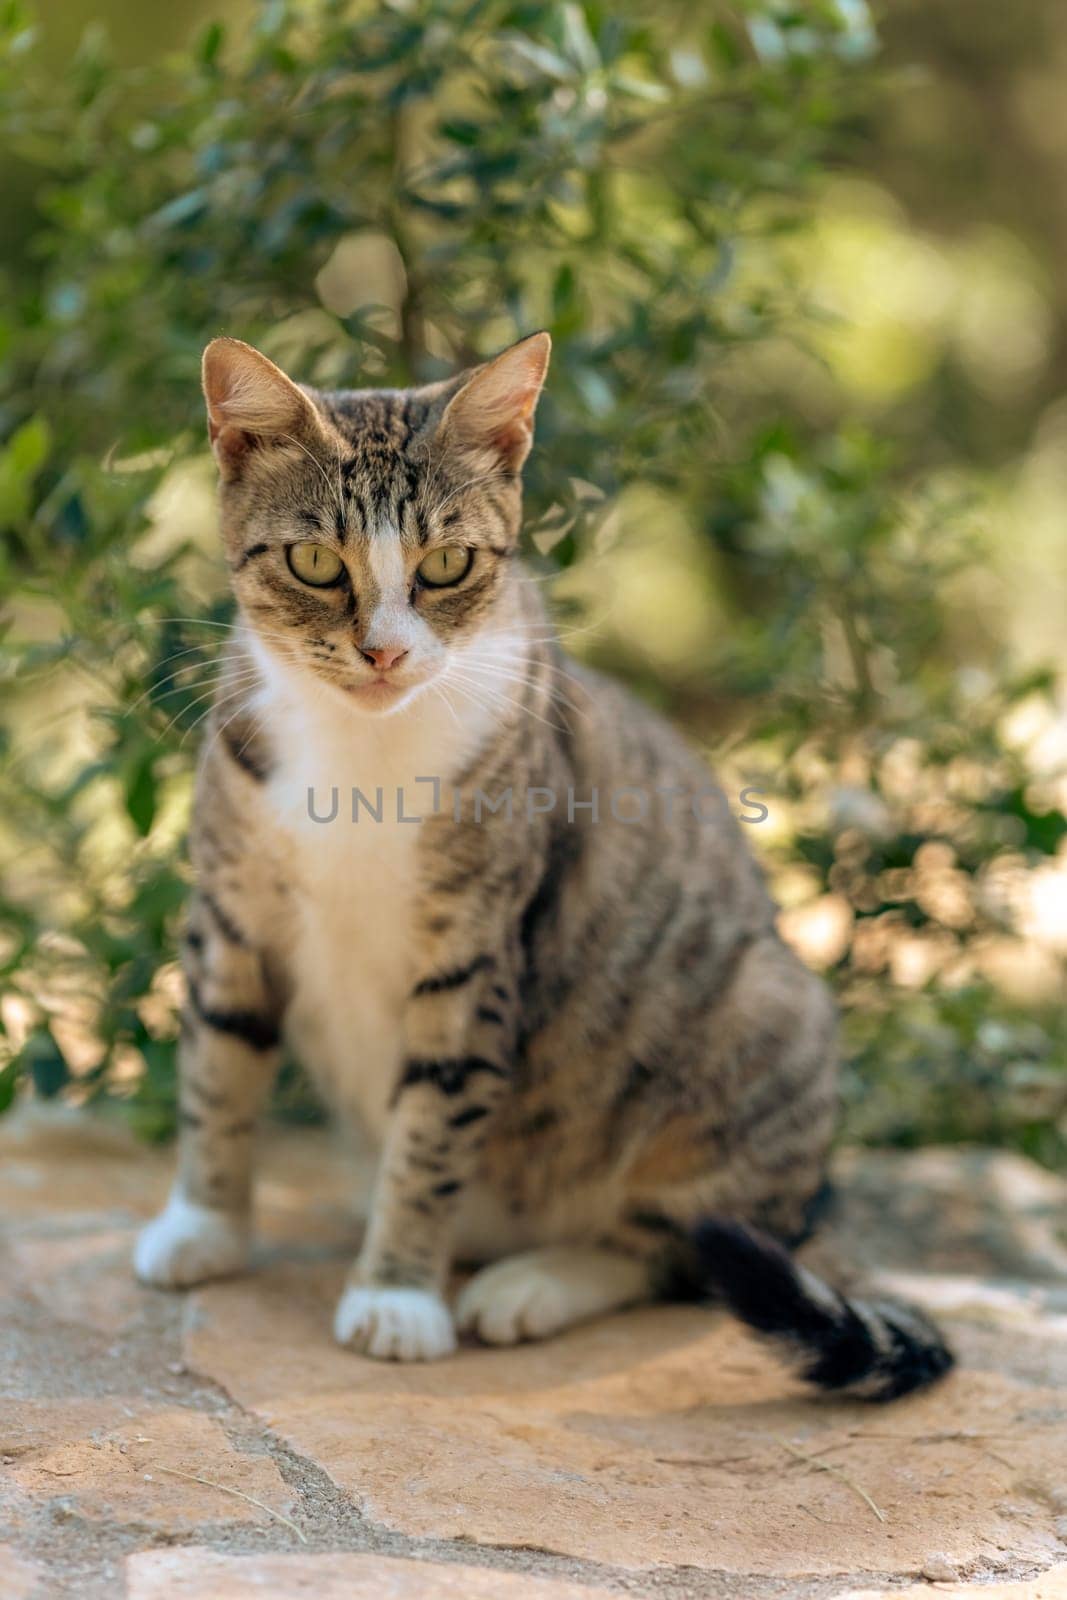 Homeless street tabby cat portrait in summer nature of park by Popov